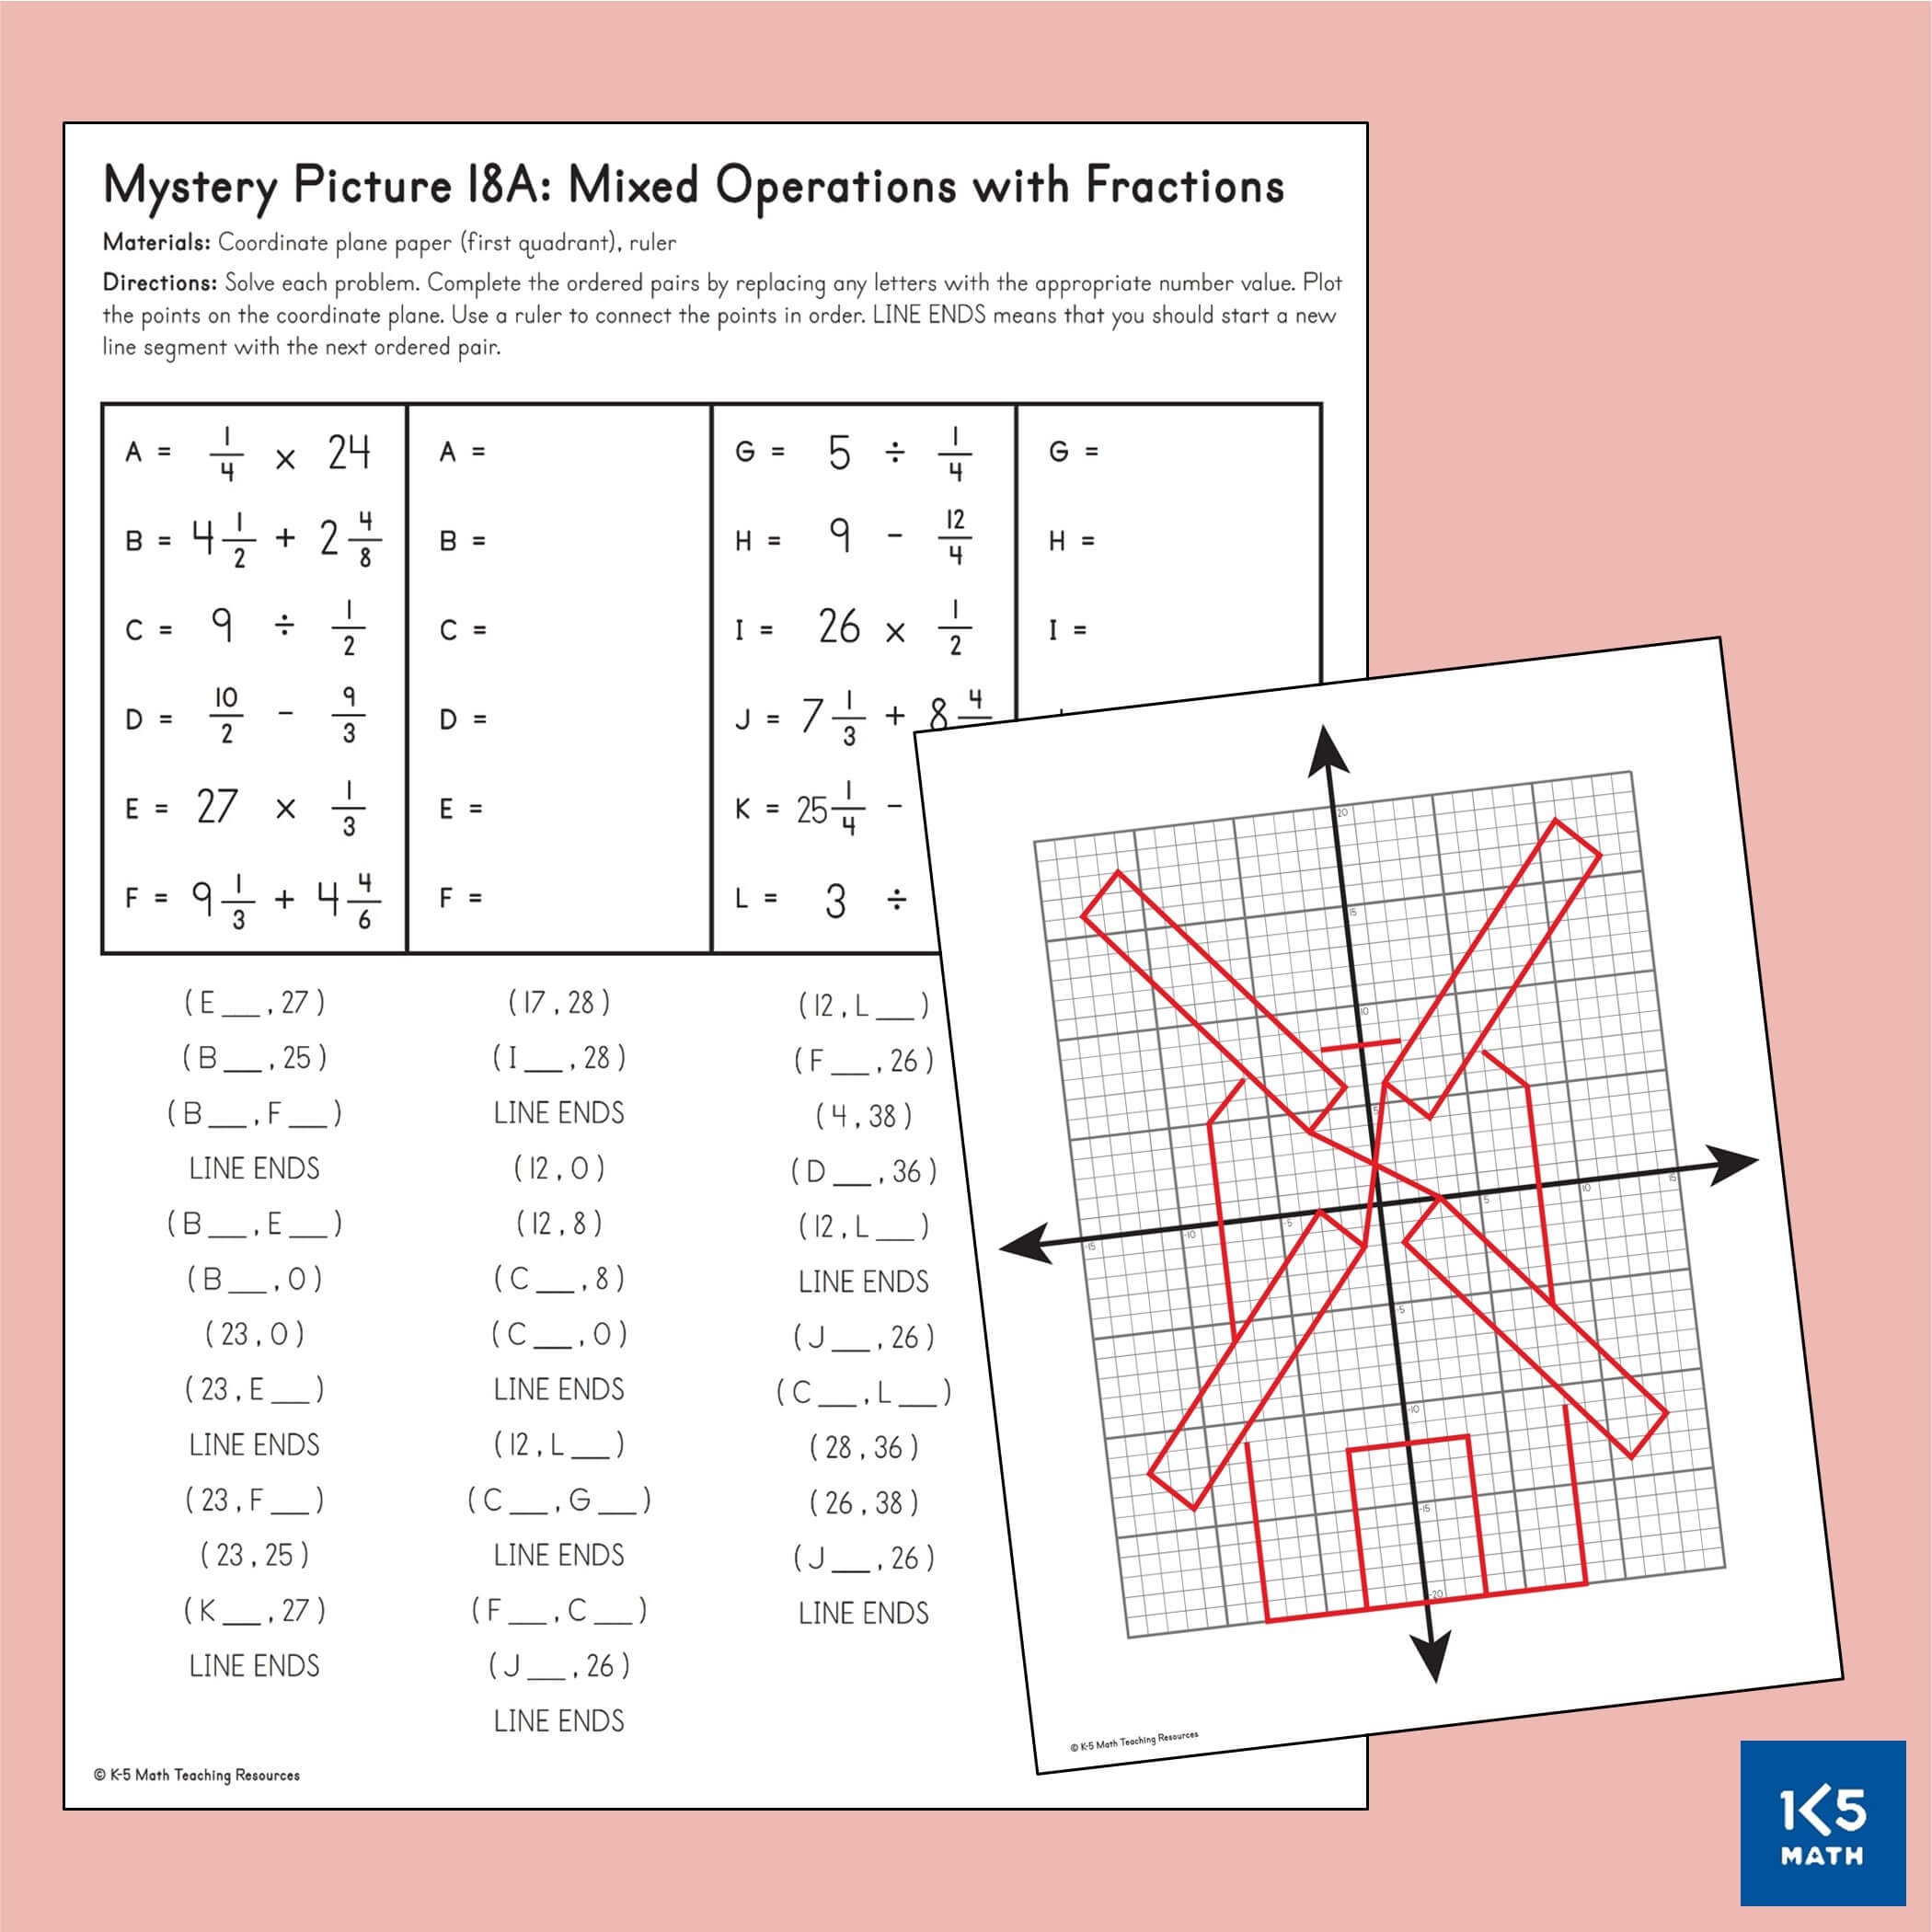 Coordinate Plane Mystery Picture 18A: Mixed Operations with Fractions